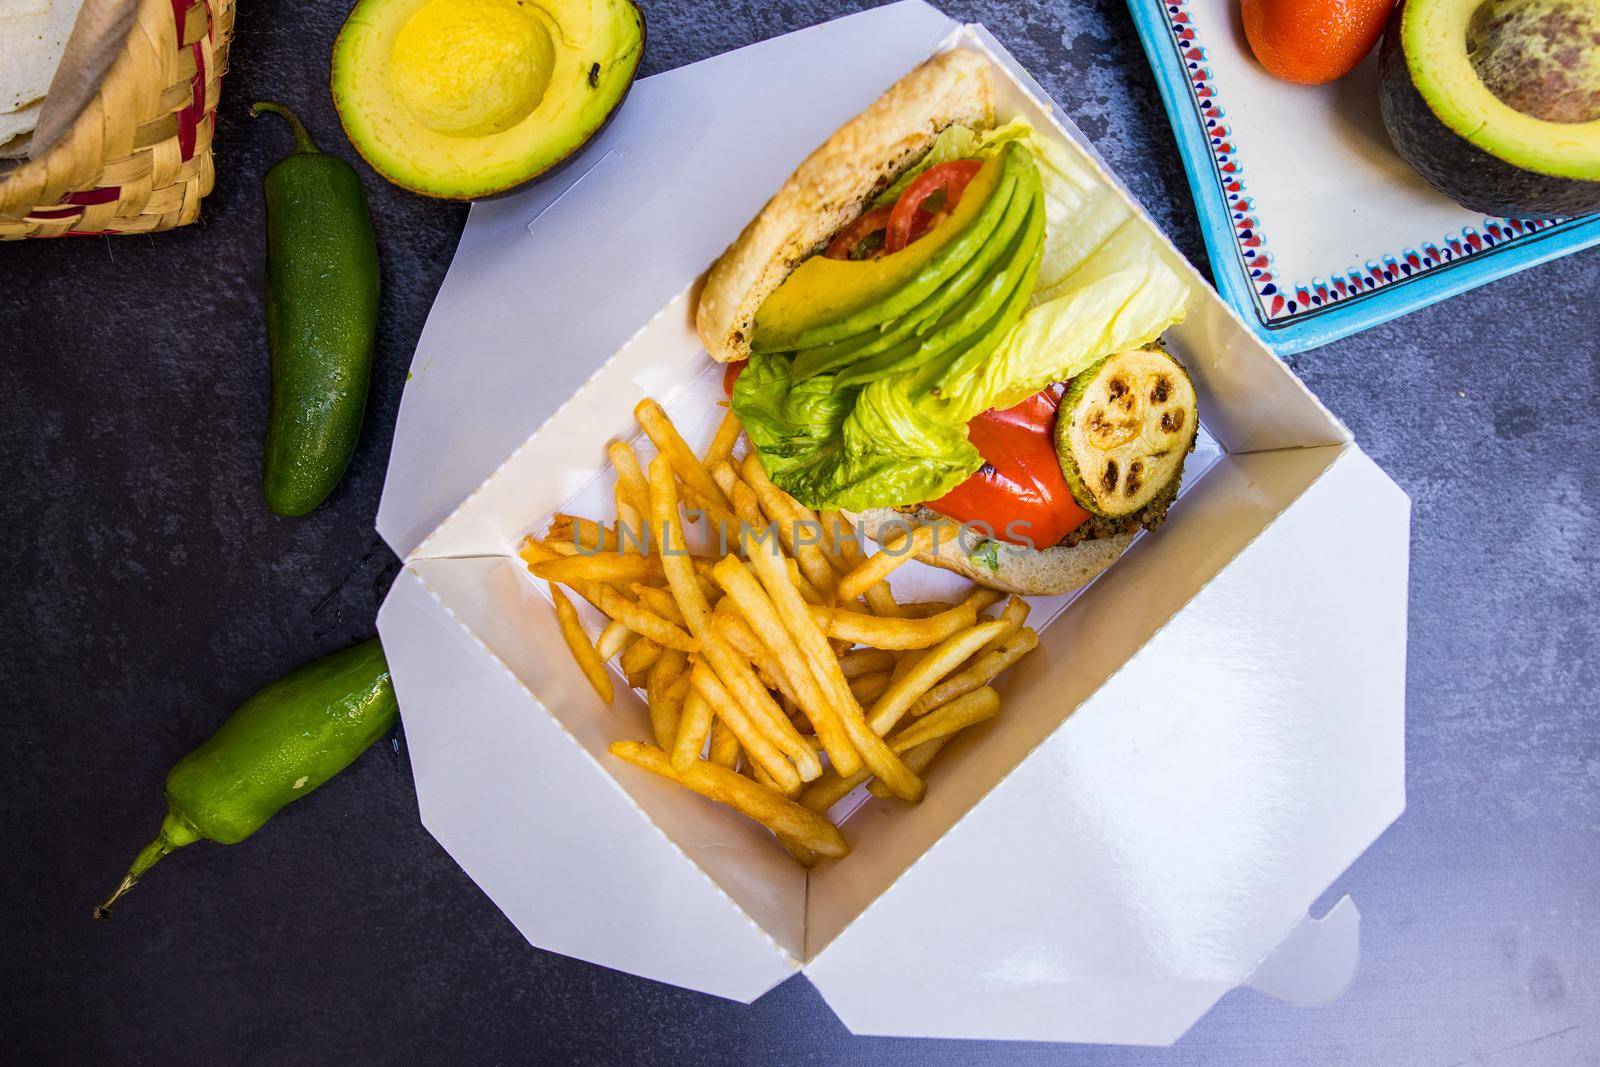 Top view of tasty French fries and sliced vegetables in white box above dark surface. Delicious avocado, tomato, lettuce, chili peppers, and fried snacks from above. Food and healthy meals